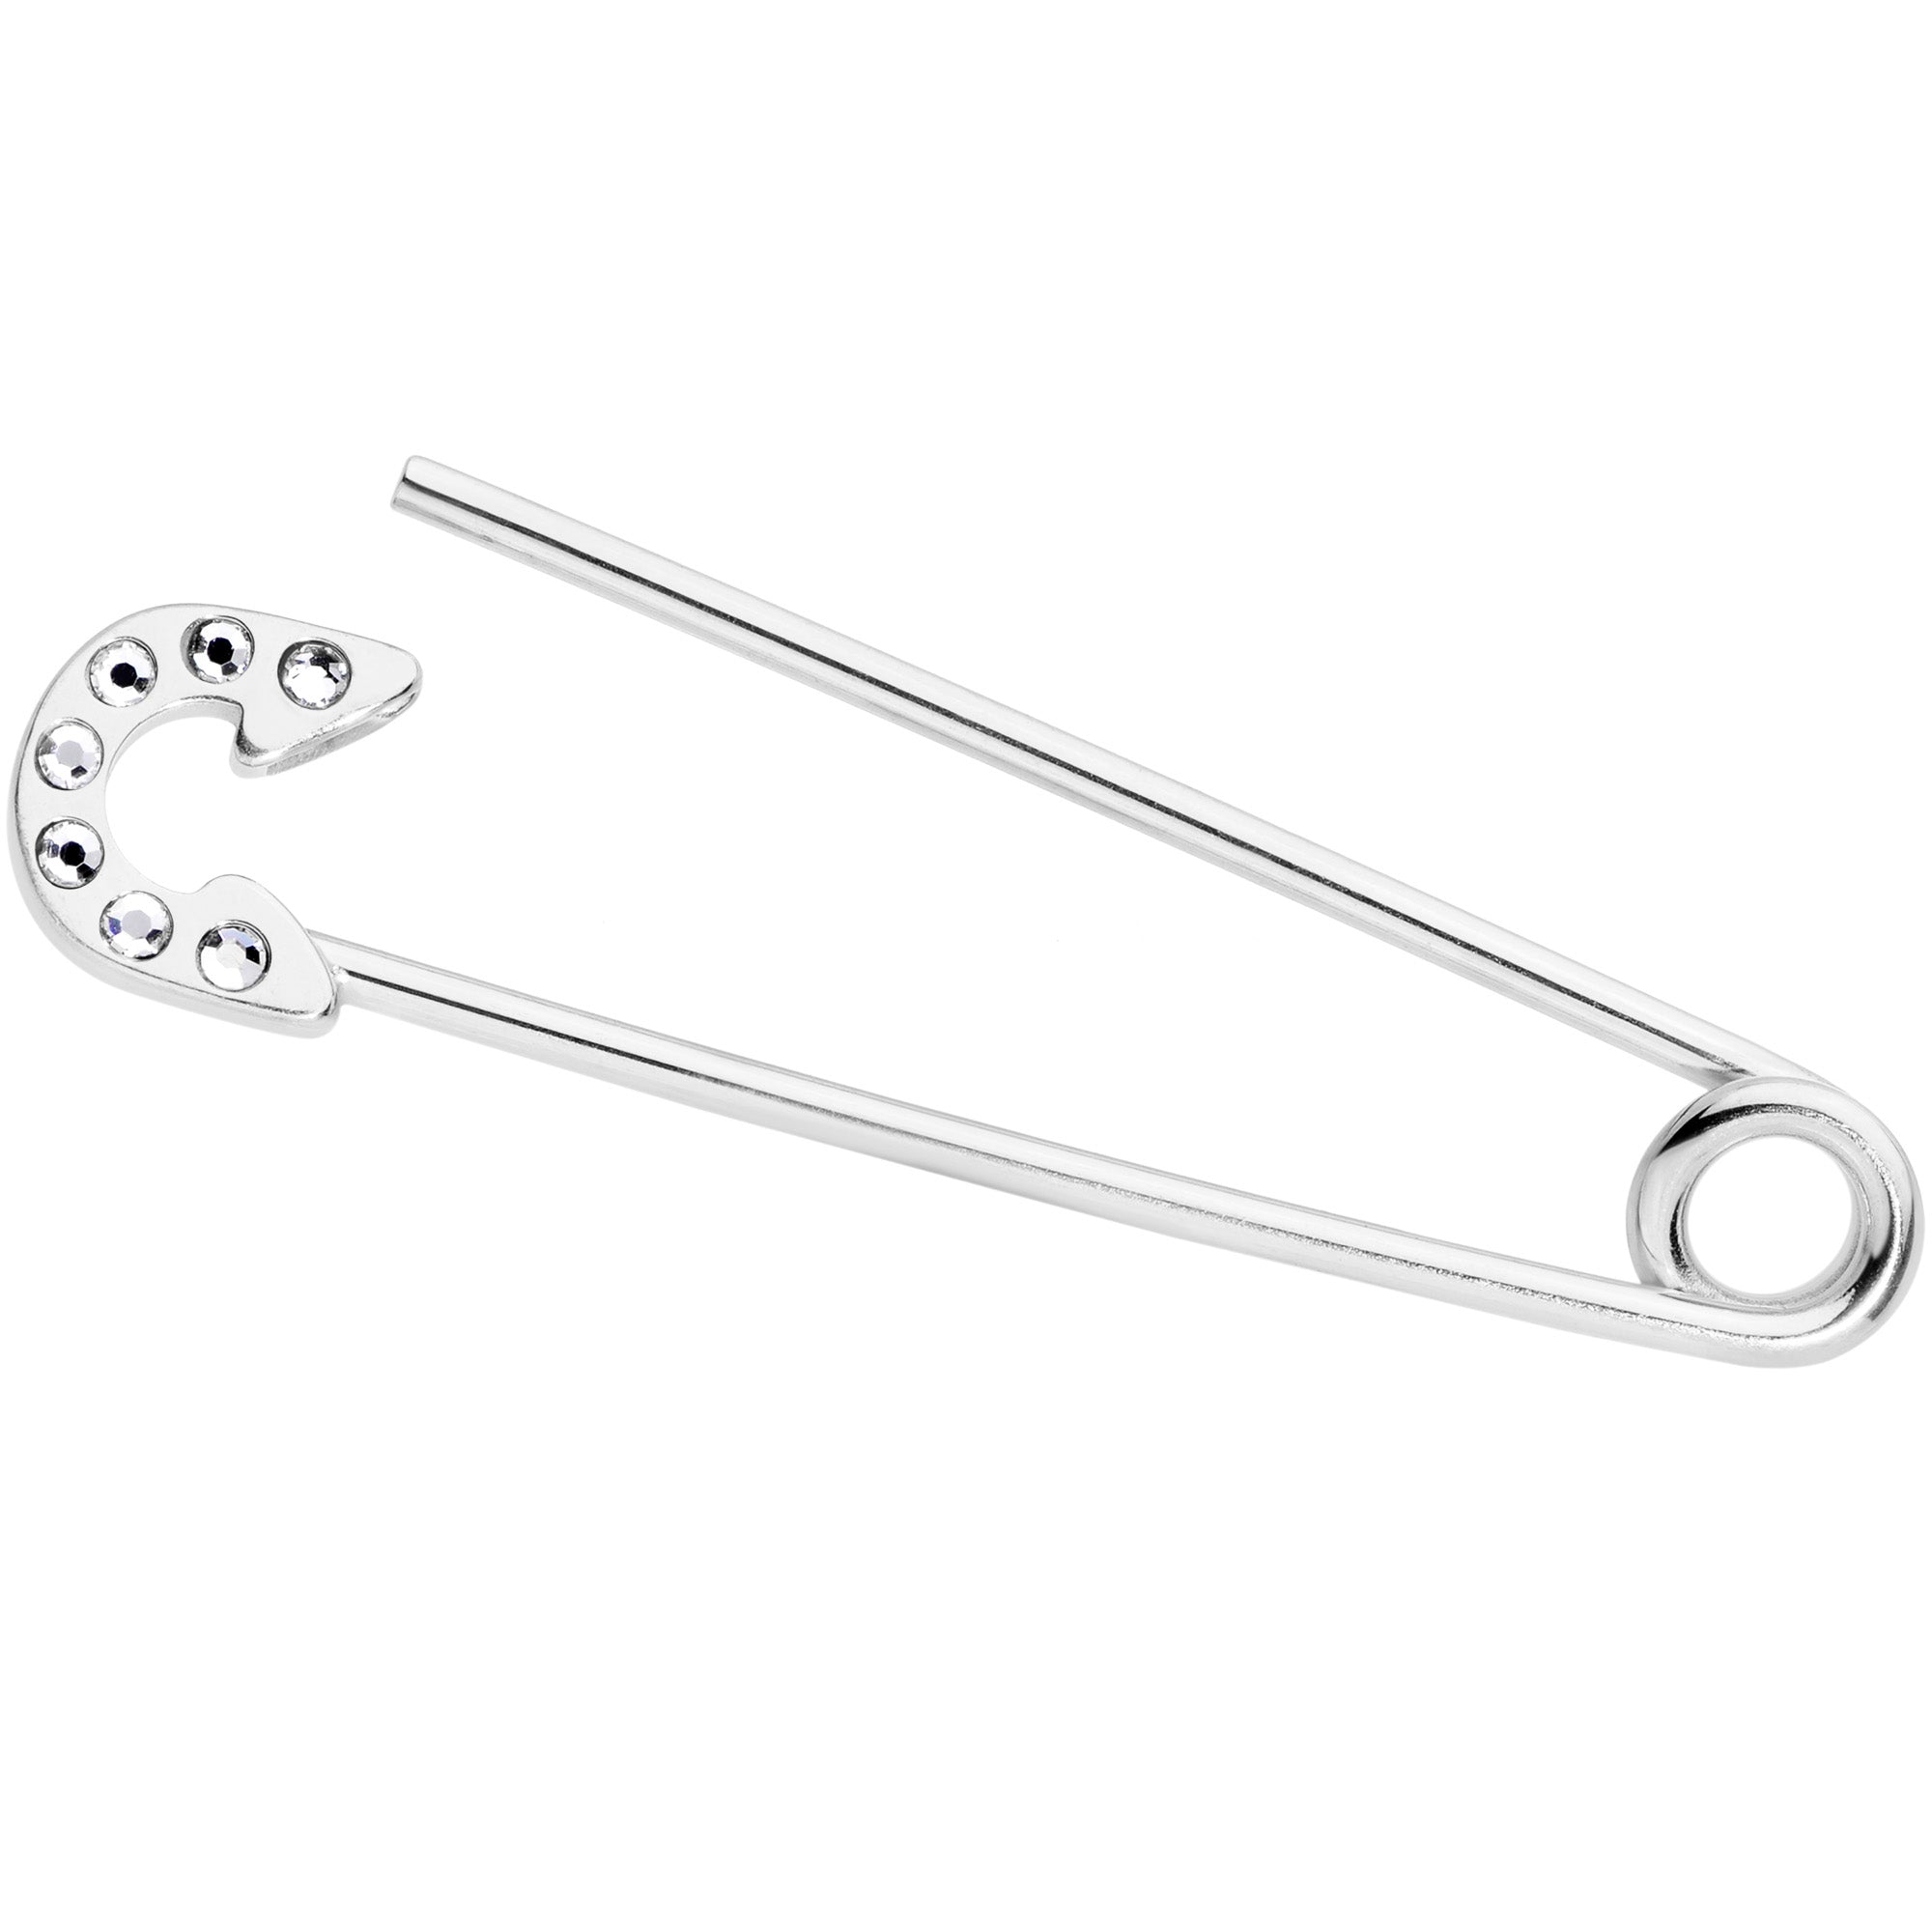 NiftyPlaza Heavy Duty Large 1-1/2 Safety Pins - 1000 Pcs - High